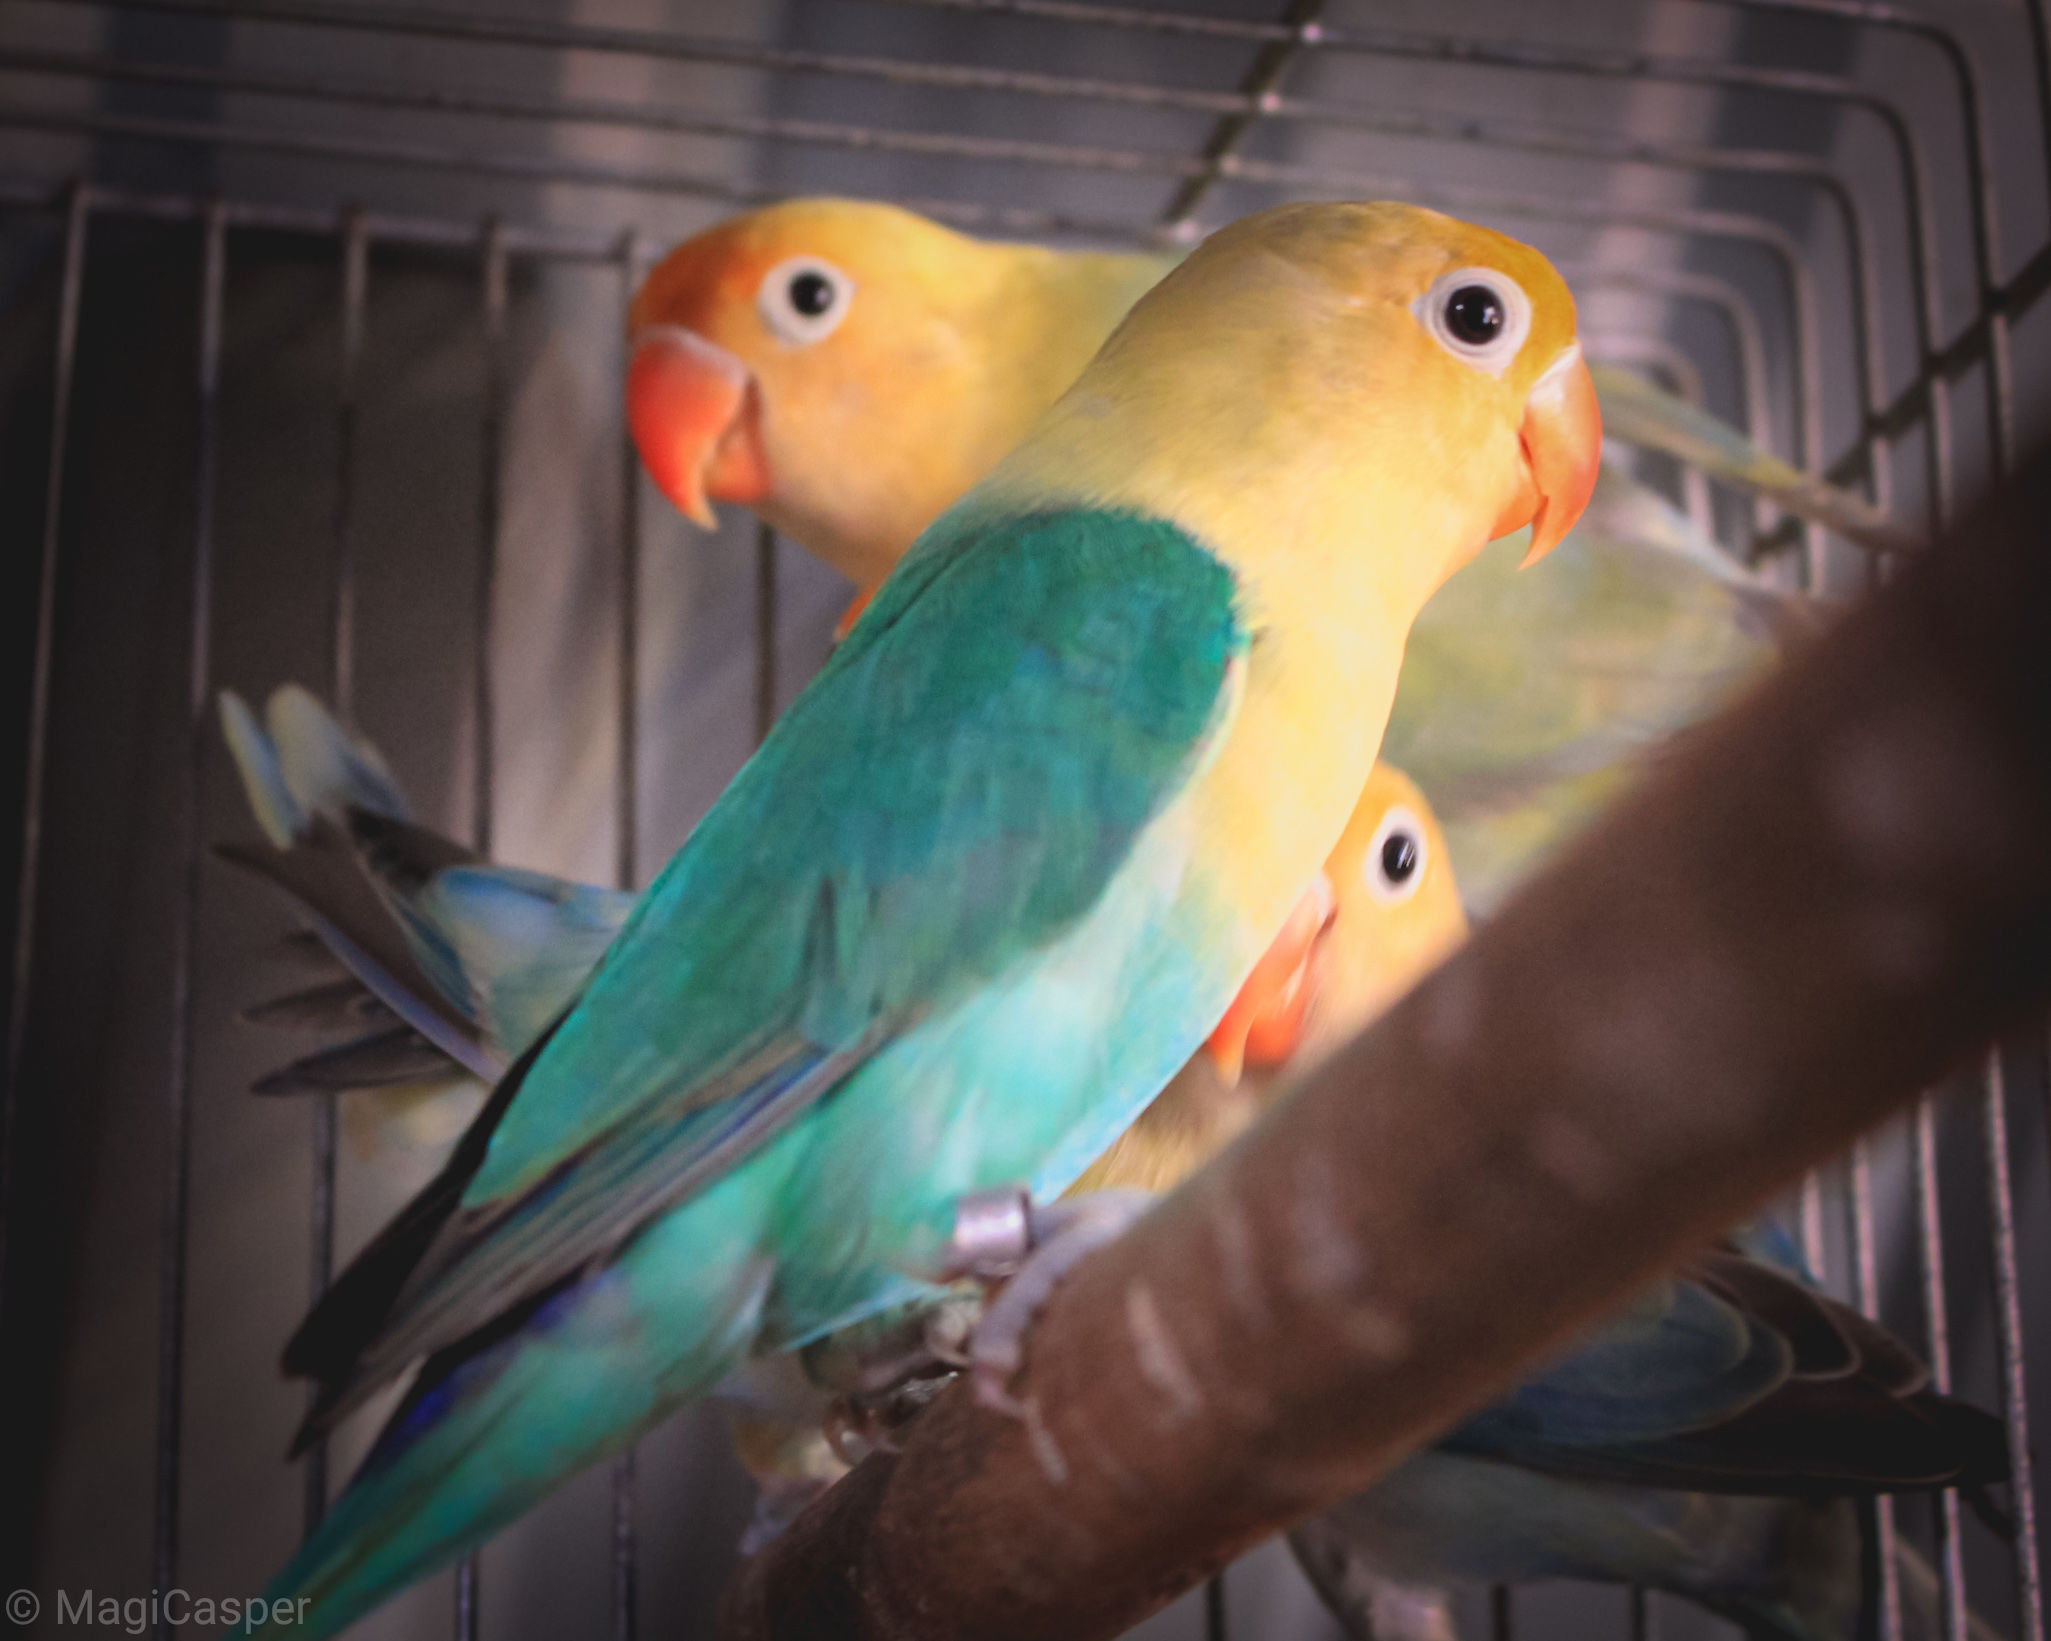 bird, animal themes, vertebrate, animal, parrot, animal wildlife, group of animals, parakeet, animals in the wild, perching, two animals, close-up, no people, cage, budgerigar, yellow, nature, birdcage, outdoors, selective focus